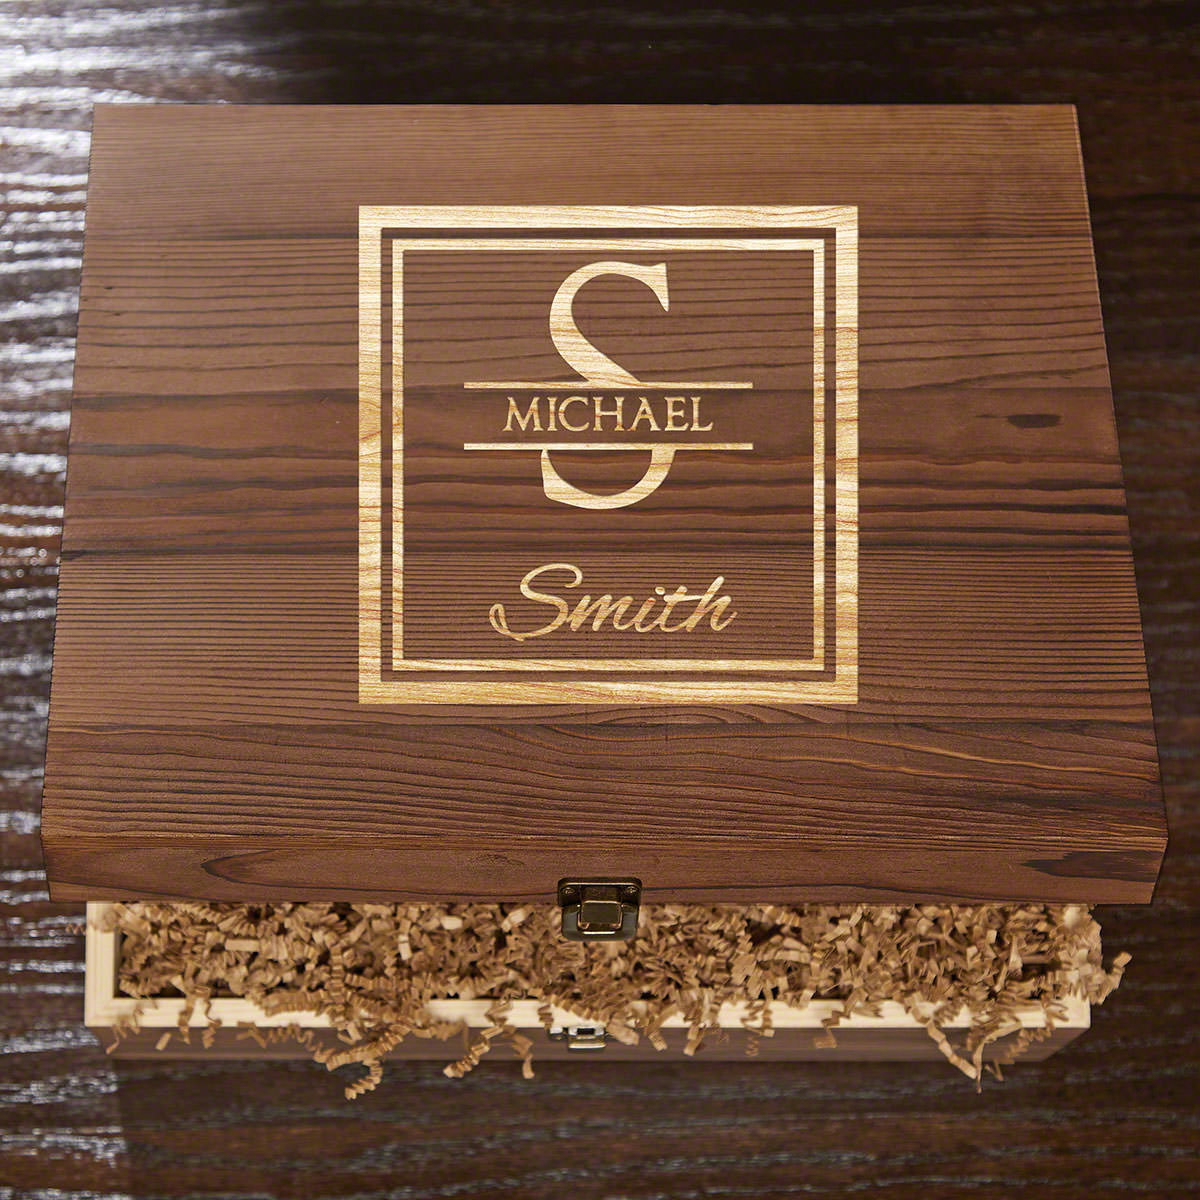 Personalized Wooden Box with Oakhill - Medium